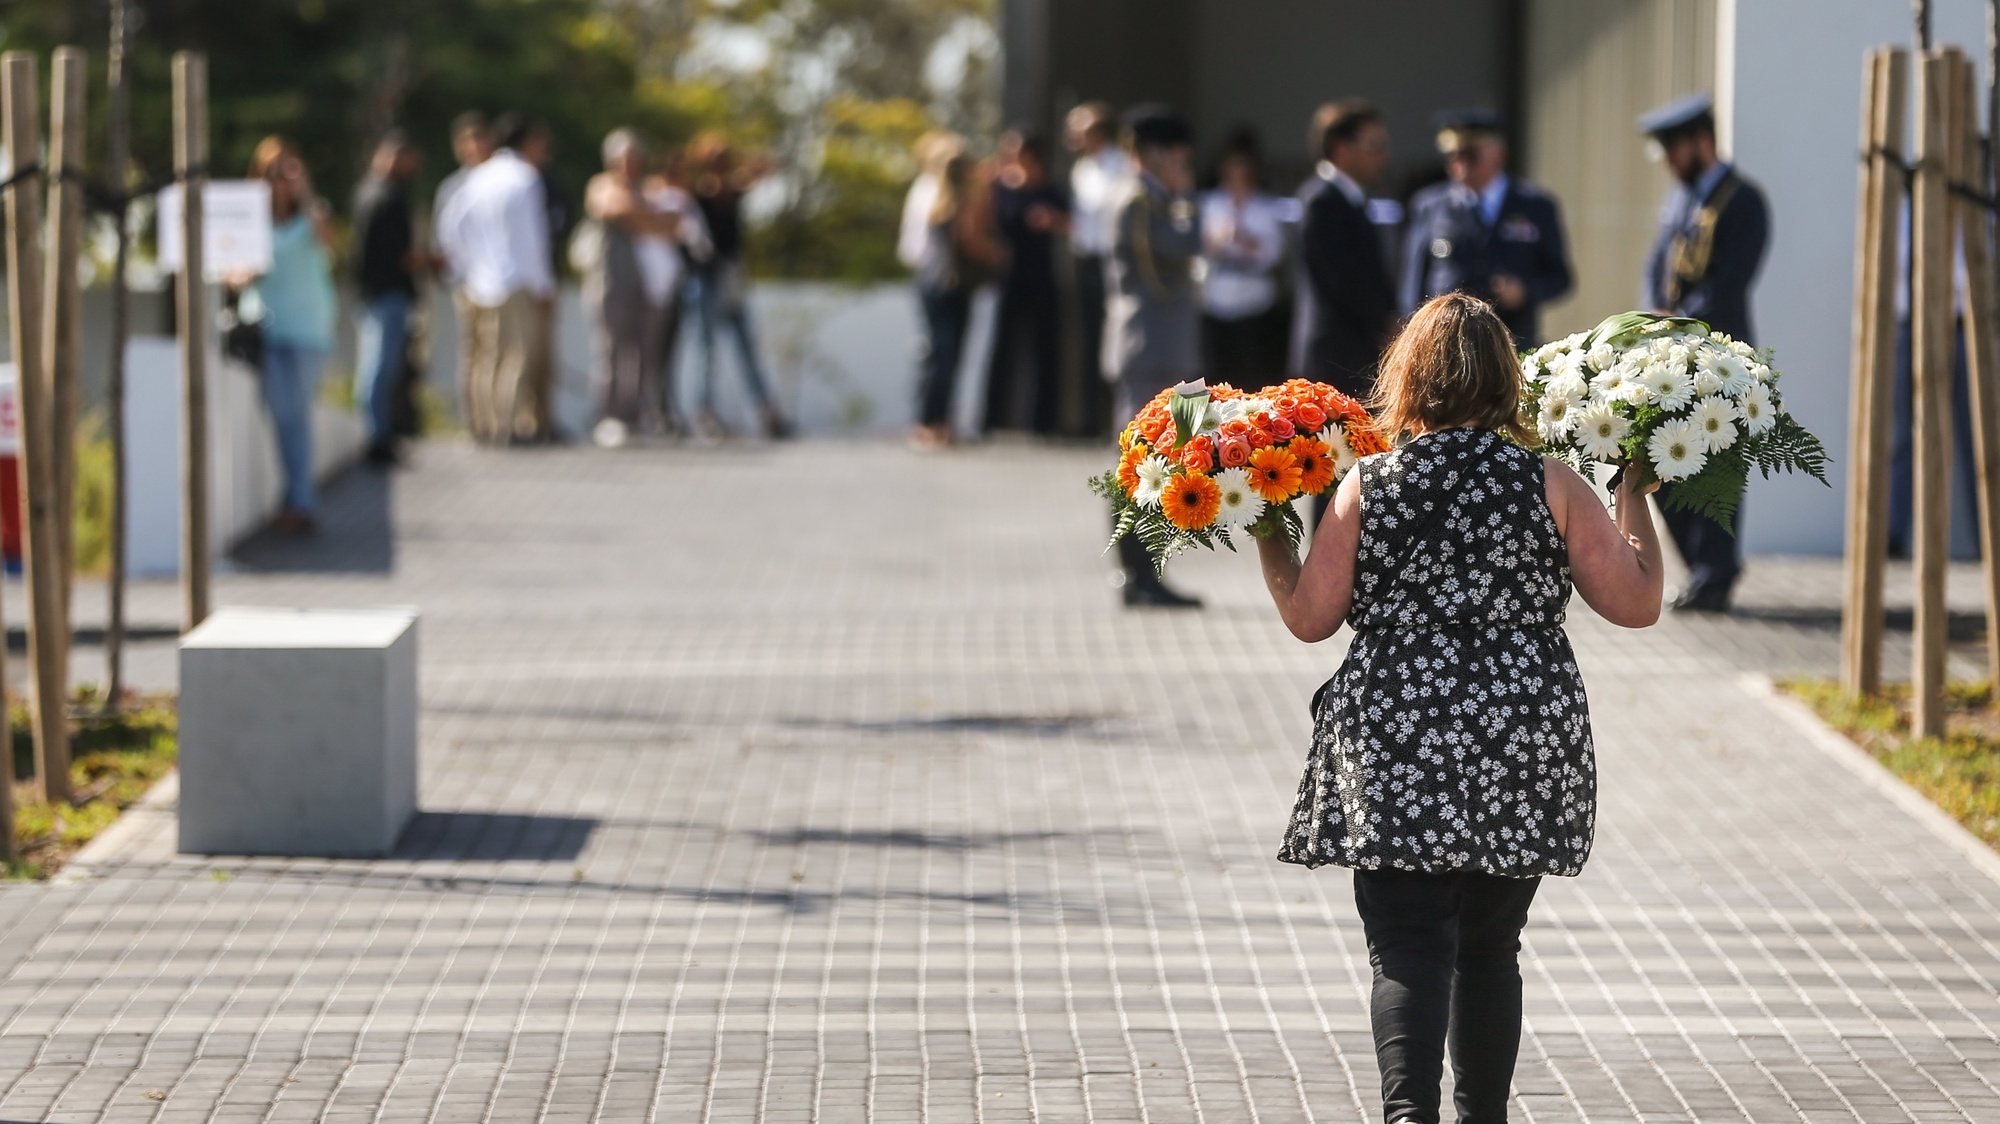 epa06157958 People gathered during the funeral ceremonies of the Portuguese victims of the terrorist attack of Barcelona, at the Cascais Funeral Center in Cascais, Portugal, 23 August 2017. The two Portuguese citizens, a 74-year-old woman, and her 20-year-old granddaughter died on the La Rambla boulevard in Barcelona, on 17 August, hit by a van that, during a route of about 600 meters, was ramming the passersby, killing 13 peole and leaving more than 130 injured.  EPA/MARIO CRUZ